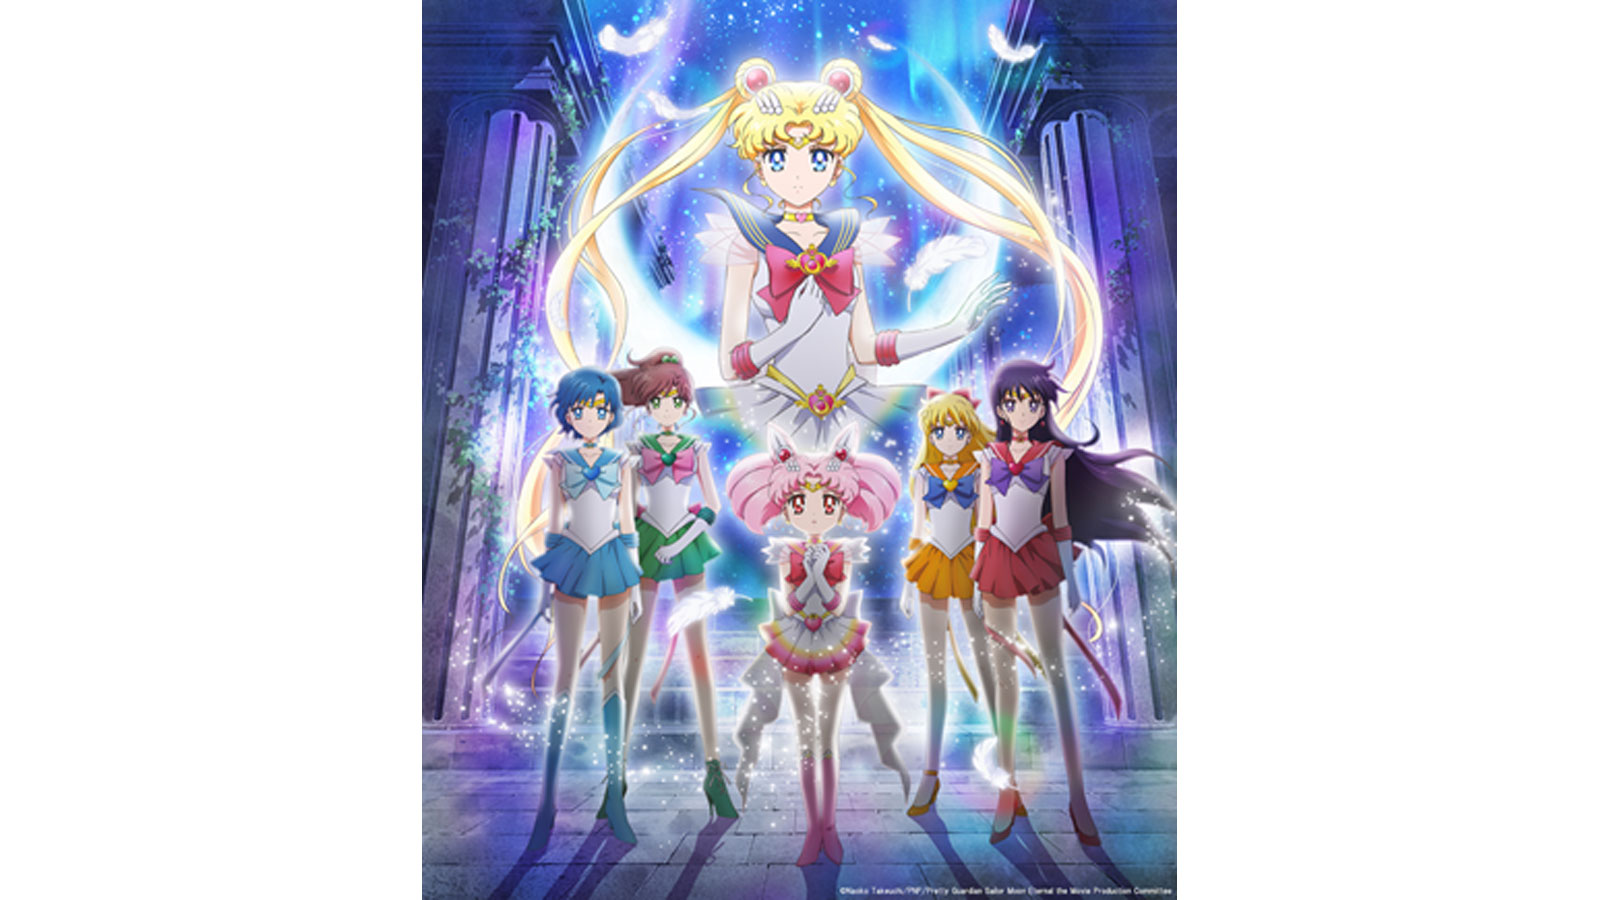 IN THE NAME OF THE MOON… PRETTY GUARDIAN SAILOR MOON ETERNAL THE MOVIE IS COMING TO NETFLIX